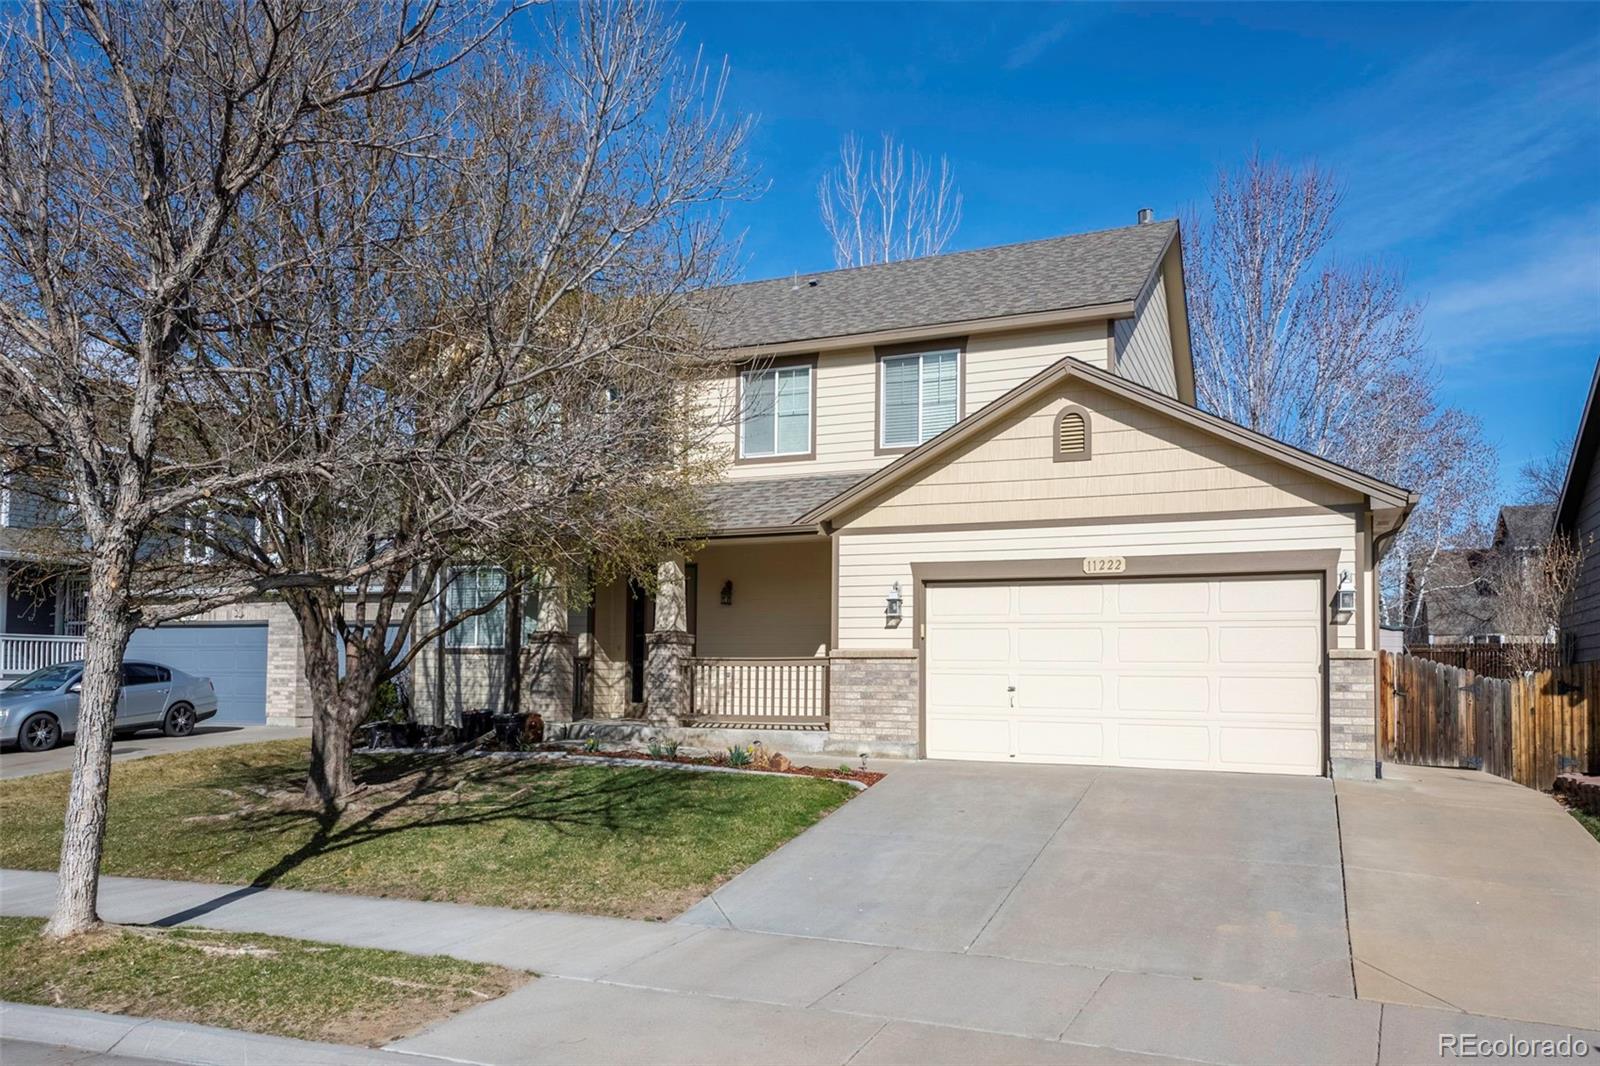 11222  kingston street, commerce city sold home. Closed on 2024-05-29 for $560,000.